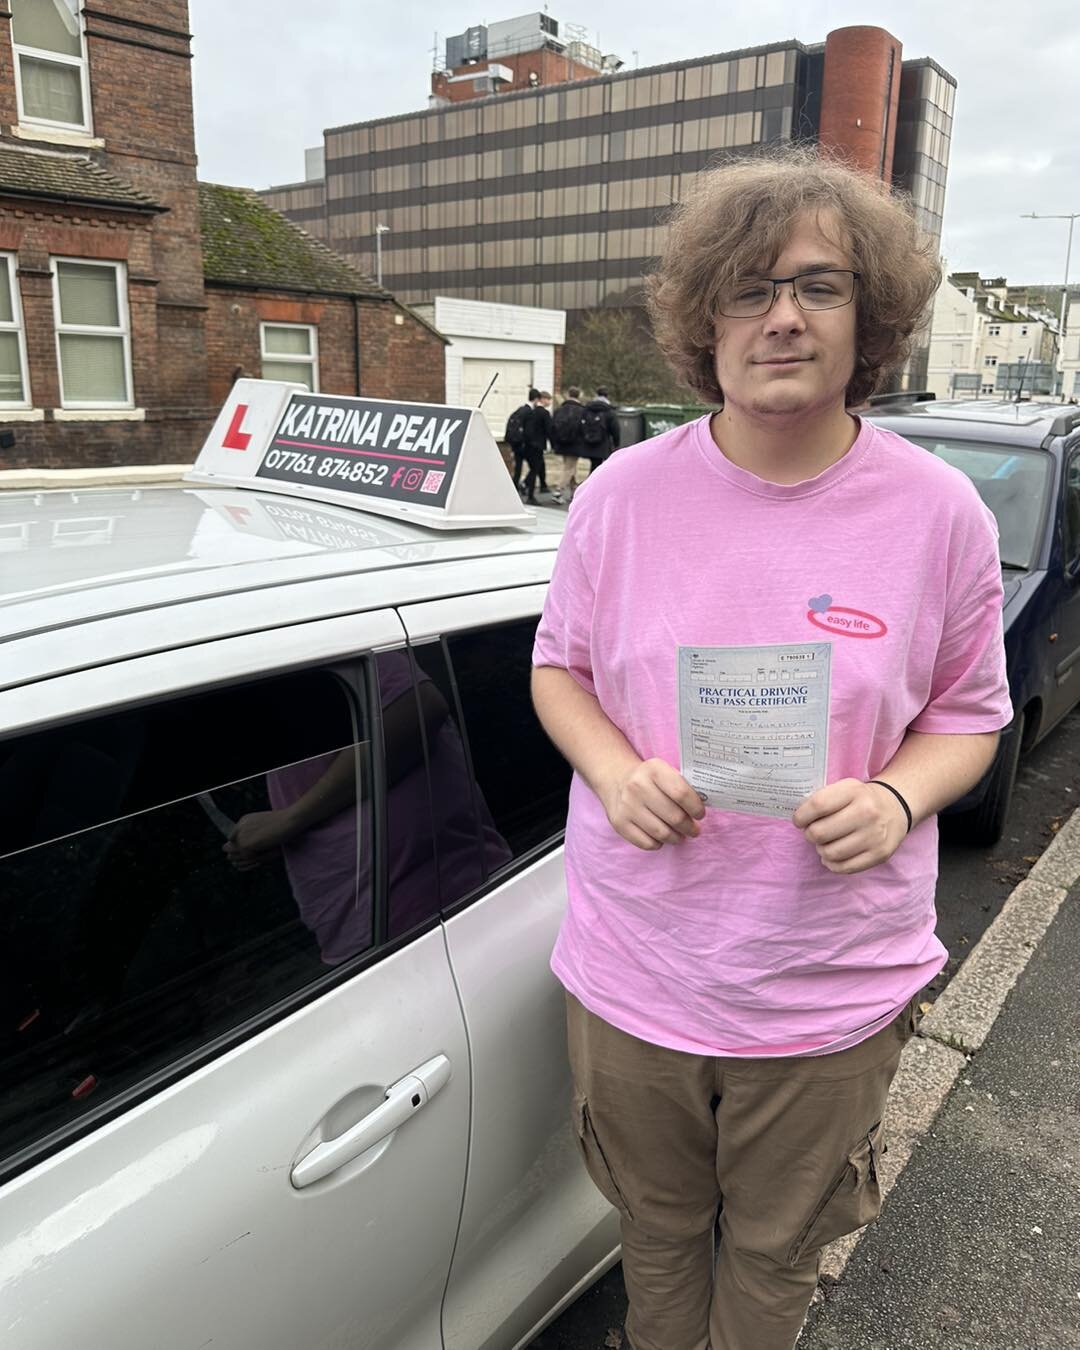 Huge congratulations to Ethan on passing his driving test today with only 4 faults! You&rsquo;ve worked so hard and today you&rsquo;ve got what you thoroughly deserve! Well done Ethan! 🥳🎉🚗🚙 #learntodrive #passyourdrivingtest #katrinapeakdrivingsc